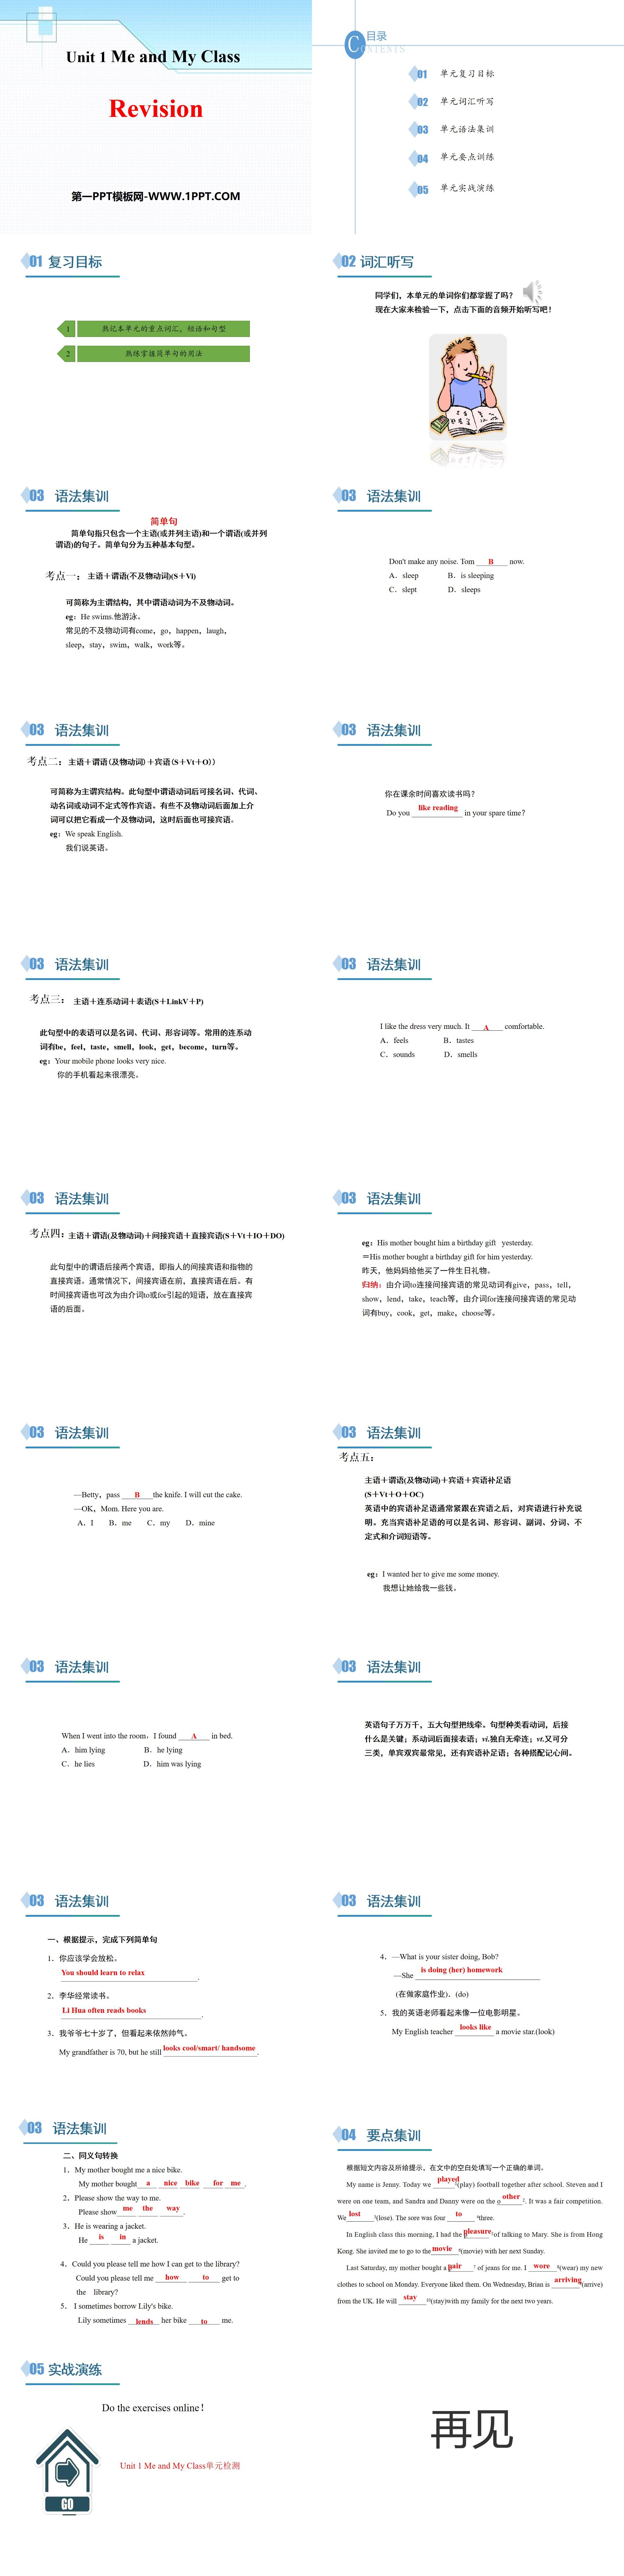 《Revision》Me and My Class PPT课件
（2）